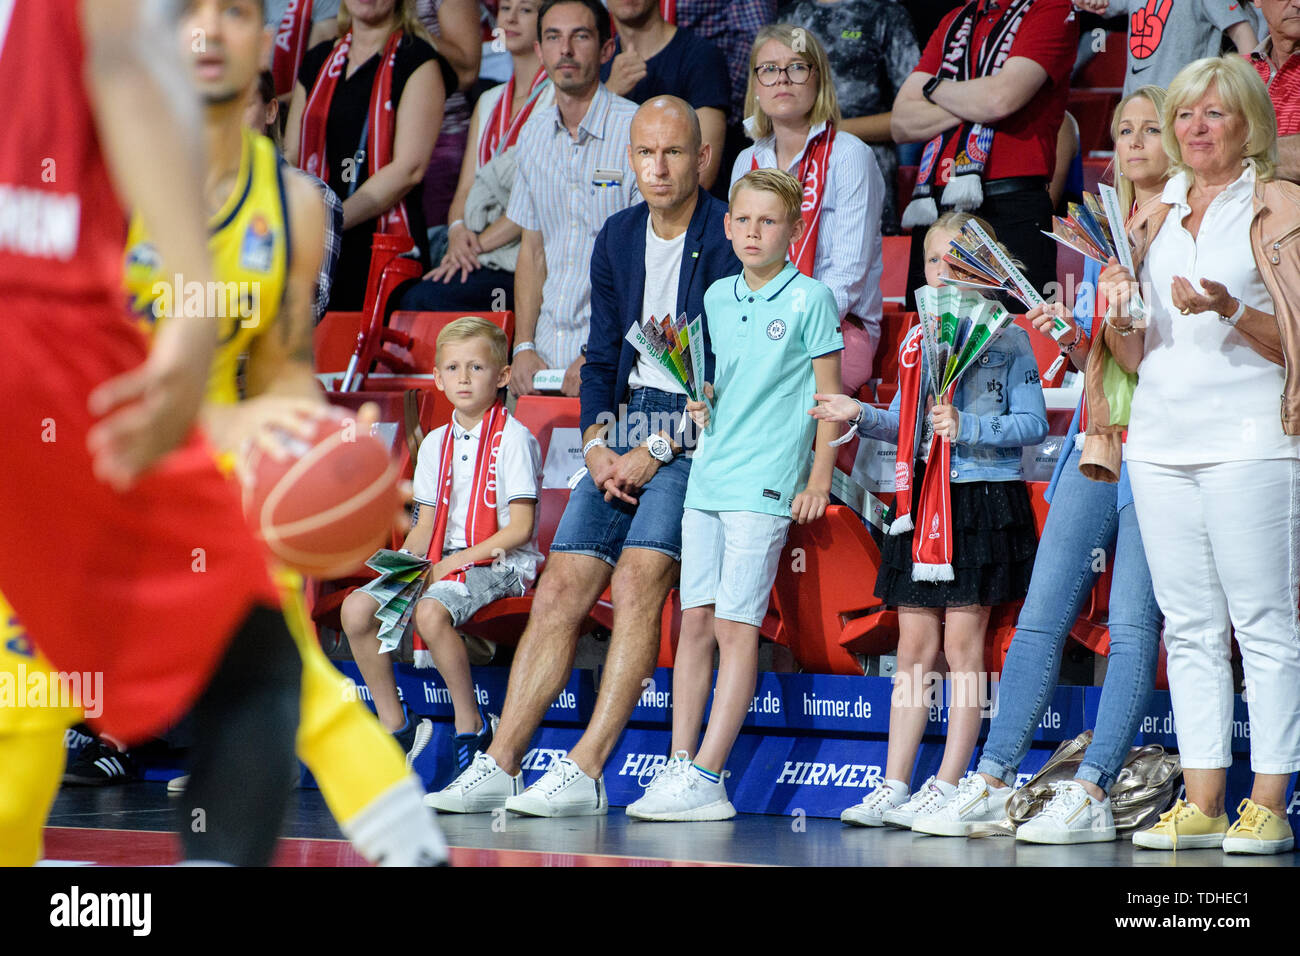 Munich, Germany. 16th June, 2019. Basketball: Bundesliga, FC Bayern Munich - ALBA Berlin, championship round, final, 1st matchday in the Audi Dome. Arjen Robben, former player of FC Bayern Munich (2nd from left), observes the game with his wife Bernadien Eillert (2nd from right) and his children Kai (left), Luka (M) and Lynn (3rd from right). Credit: Matthias Balk/dpa/Alamy Live News Stock Photo